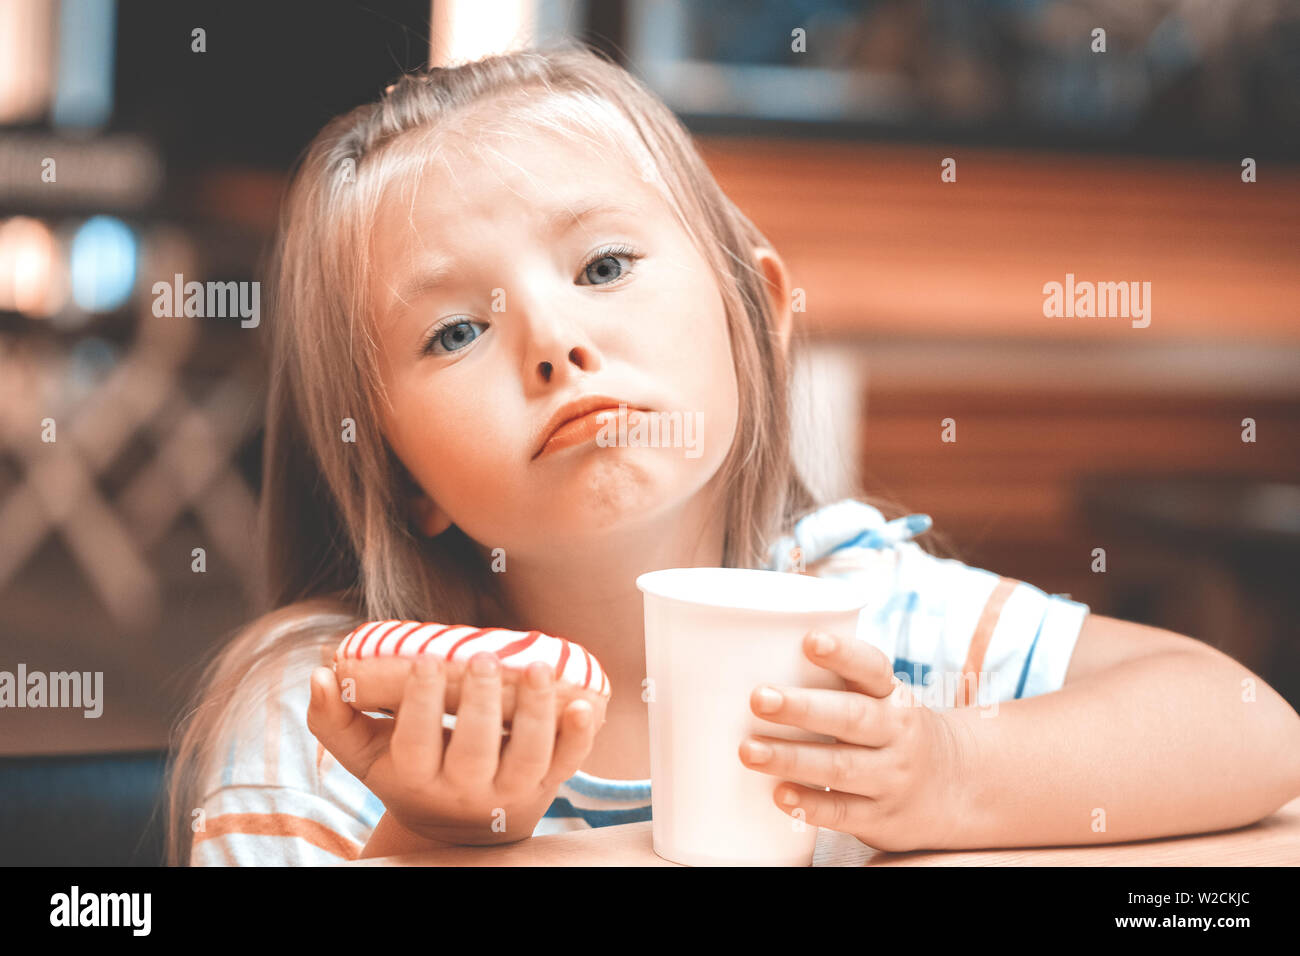 Cute little girl eat stripsed donut on cafe shop. This image has a vintage, film grain look. Stock Photo